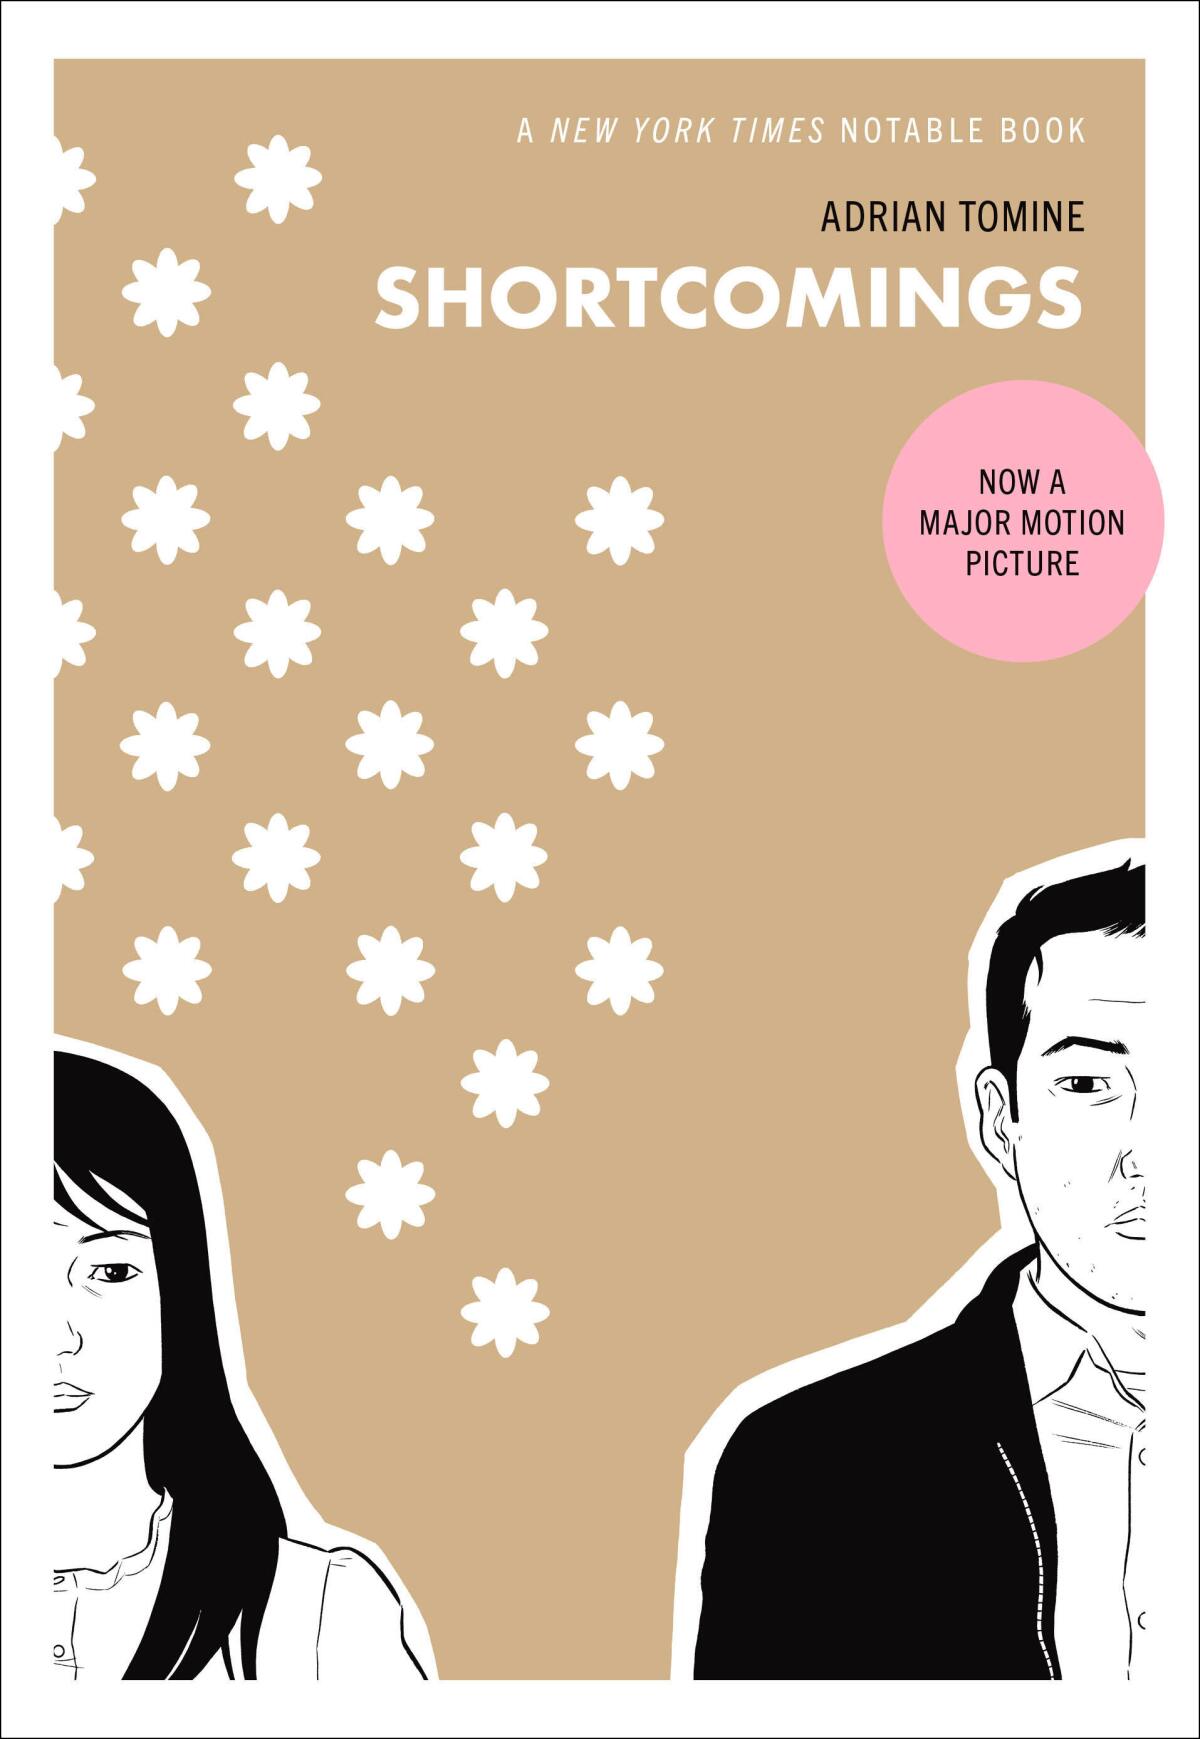 The cover of "Shortcomings," featuring a young woman and man, half of their faces cut off by the book's edges.